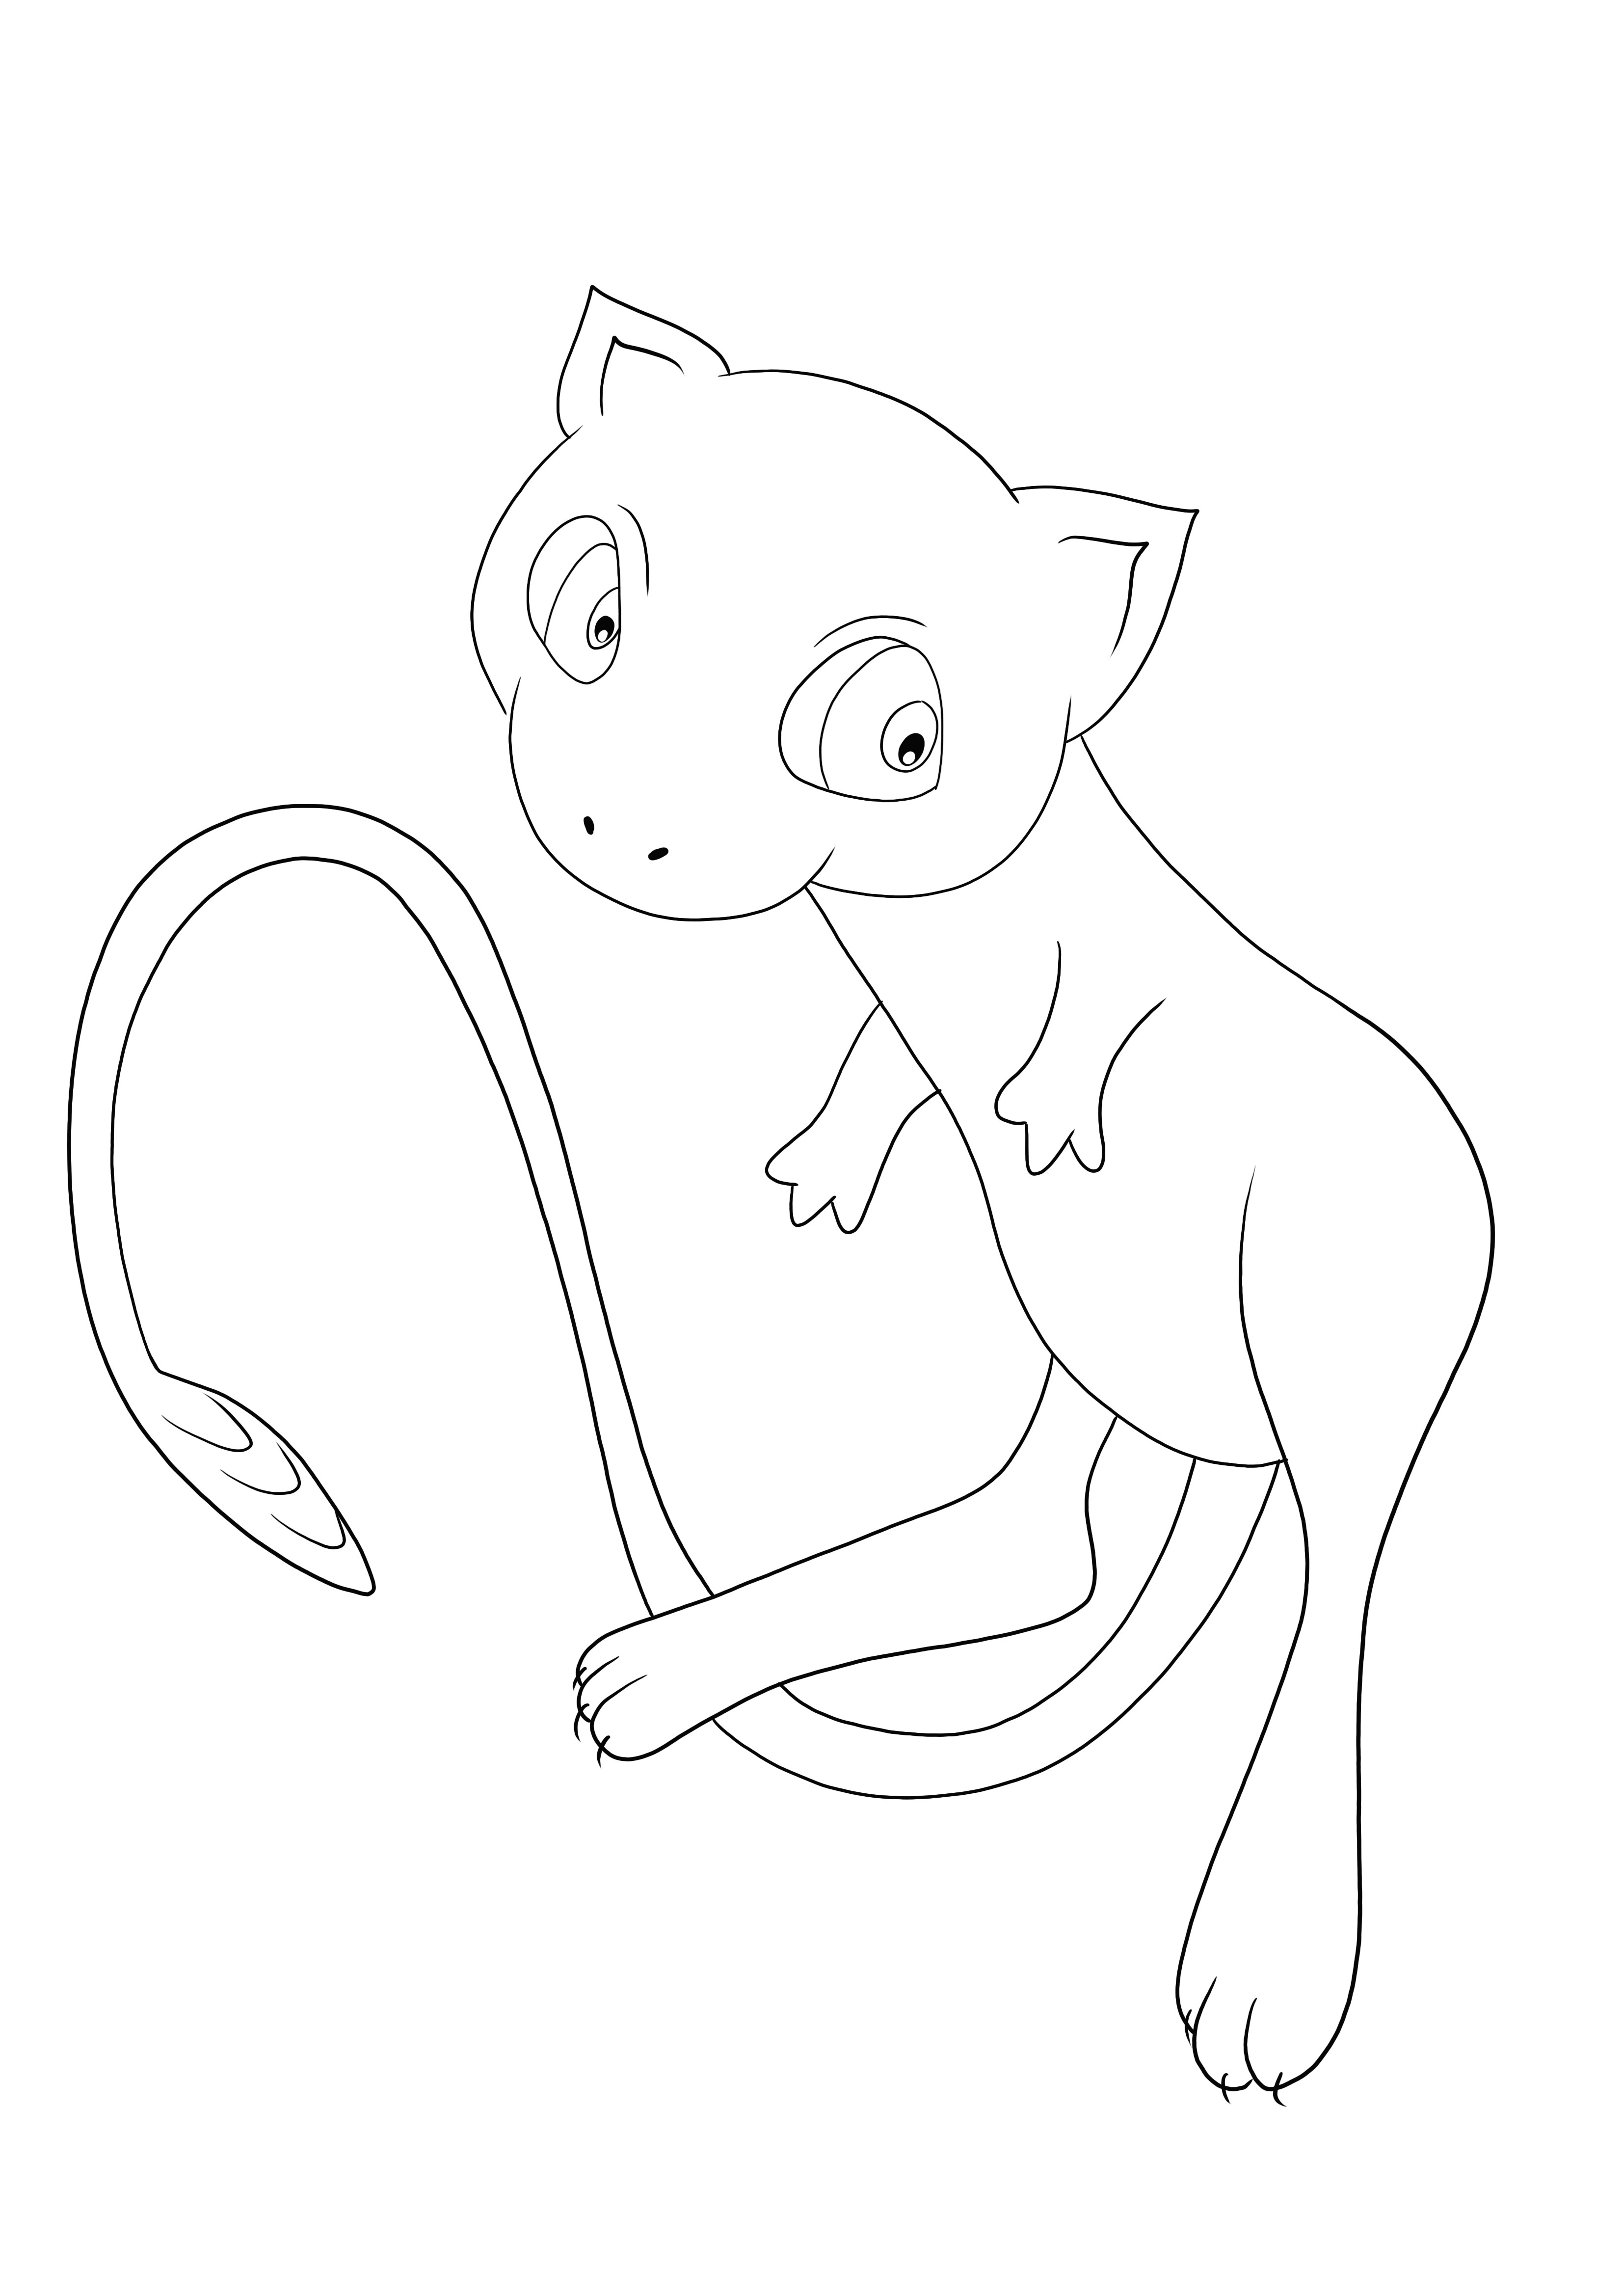 Pokémon Mew is waiting to be downloaded or printed for free and colored